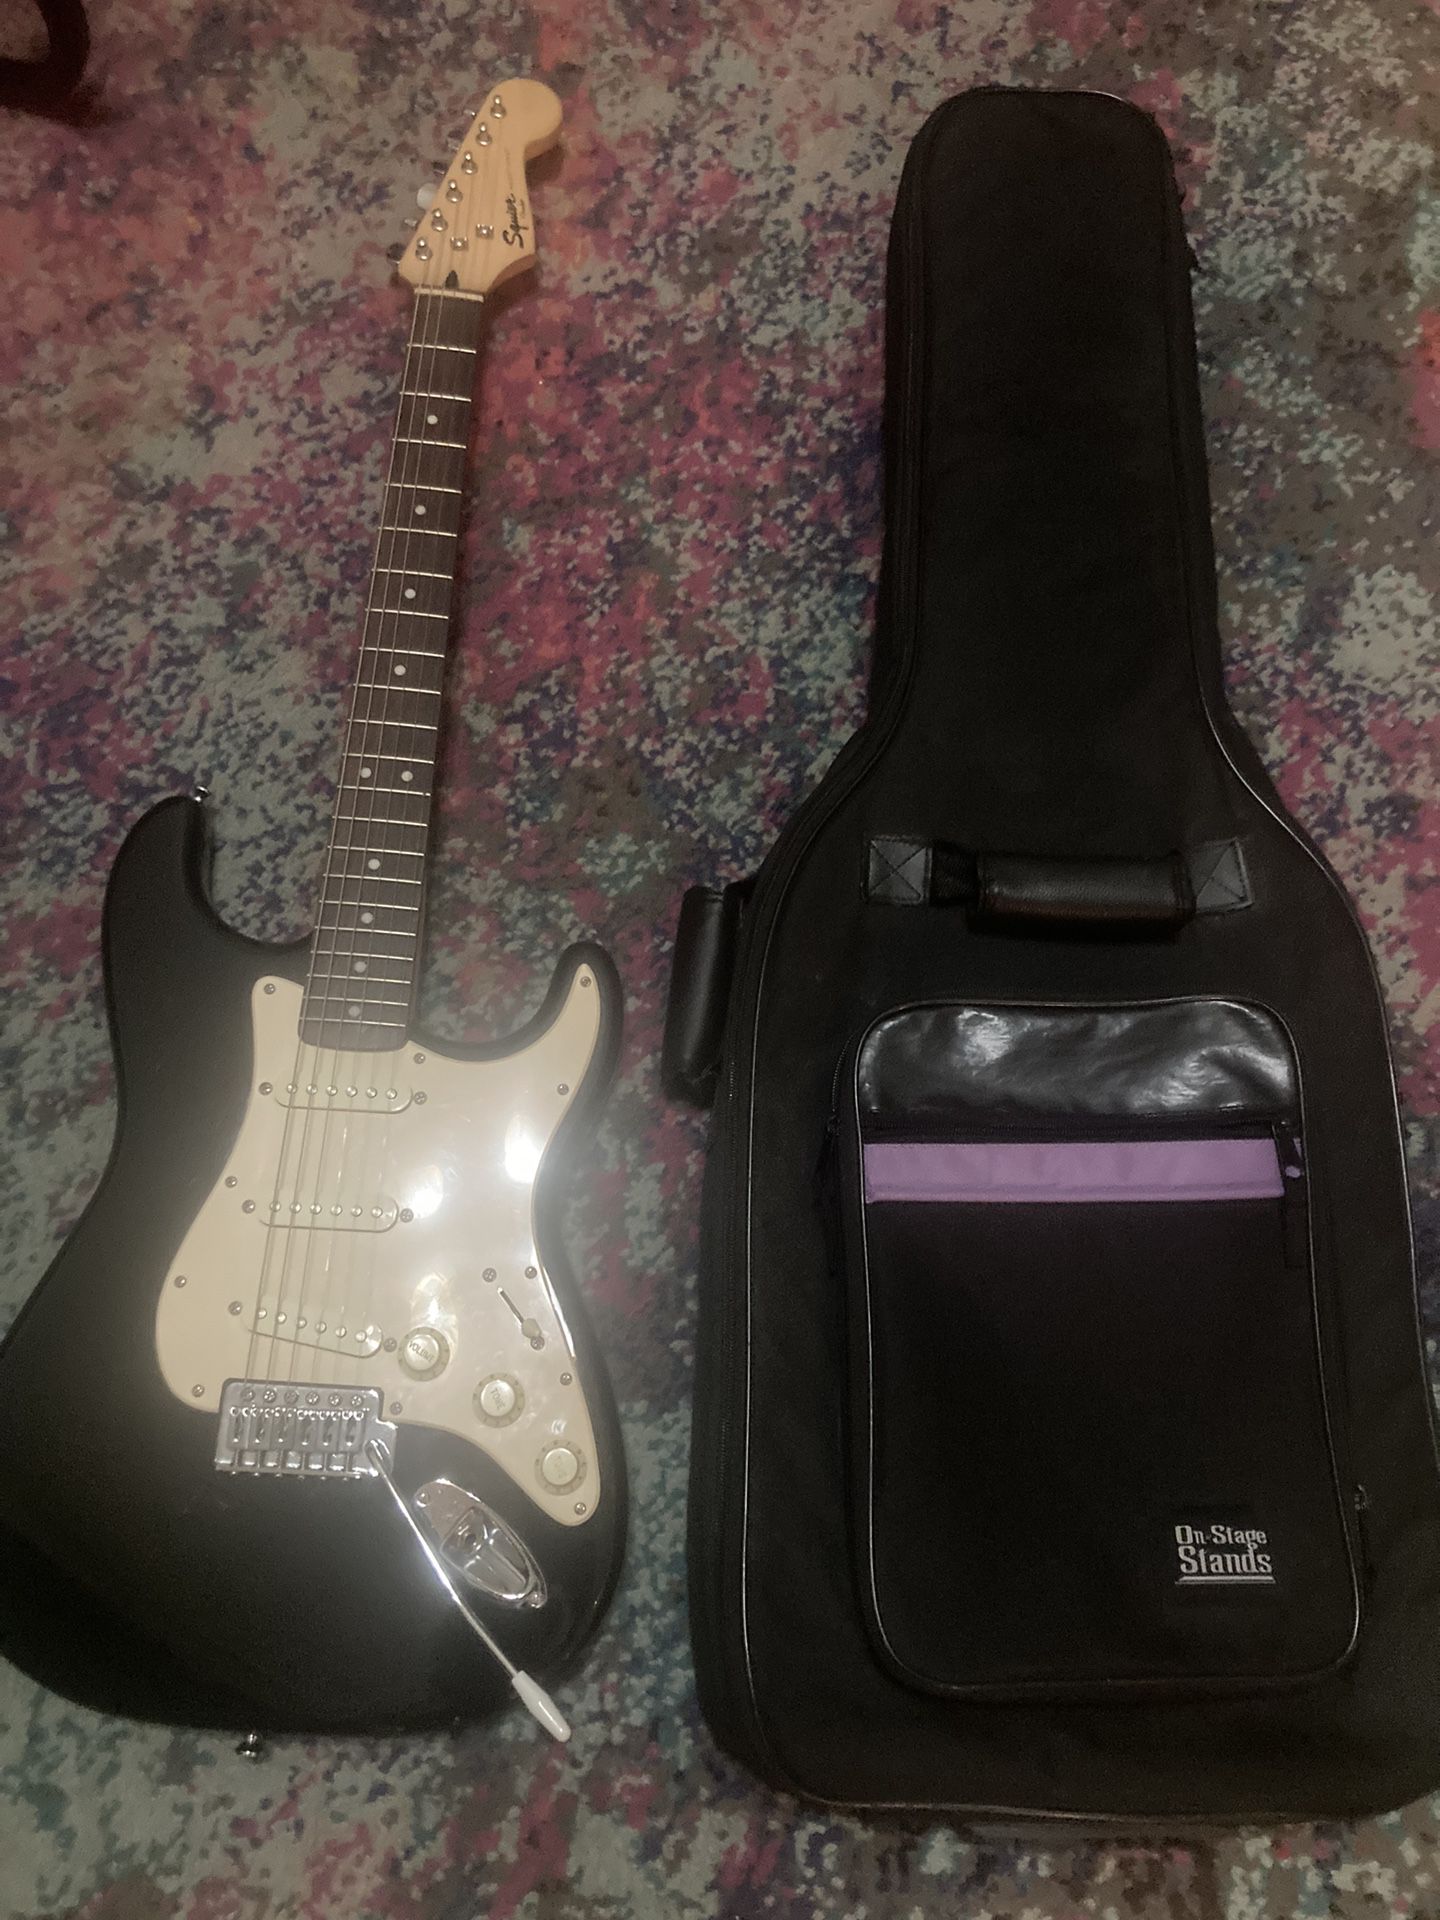 Squier Stratocaster Electric Guitar W/ Carry Case